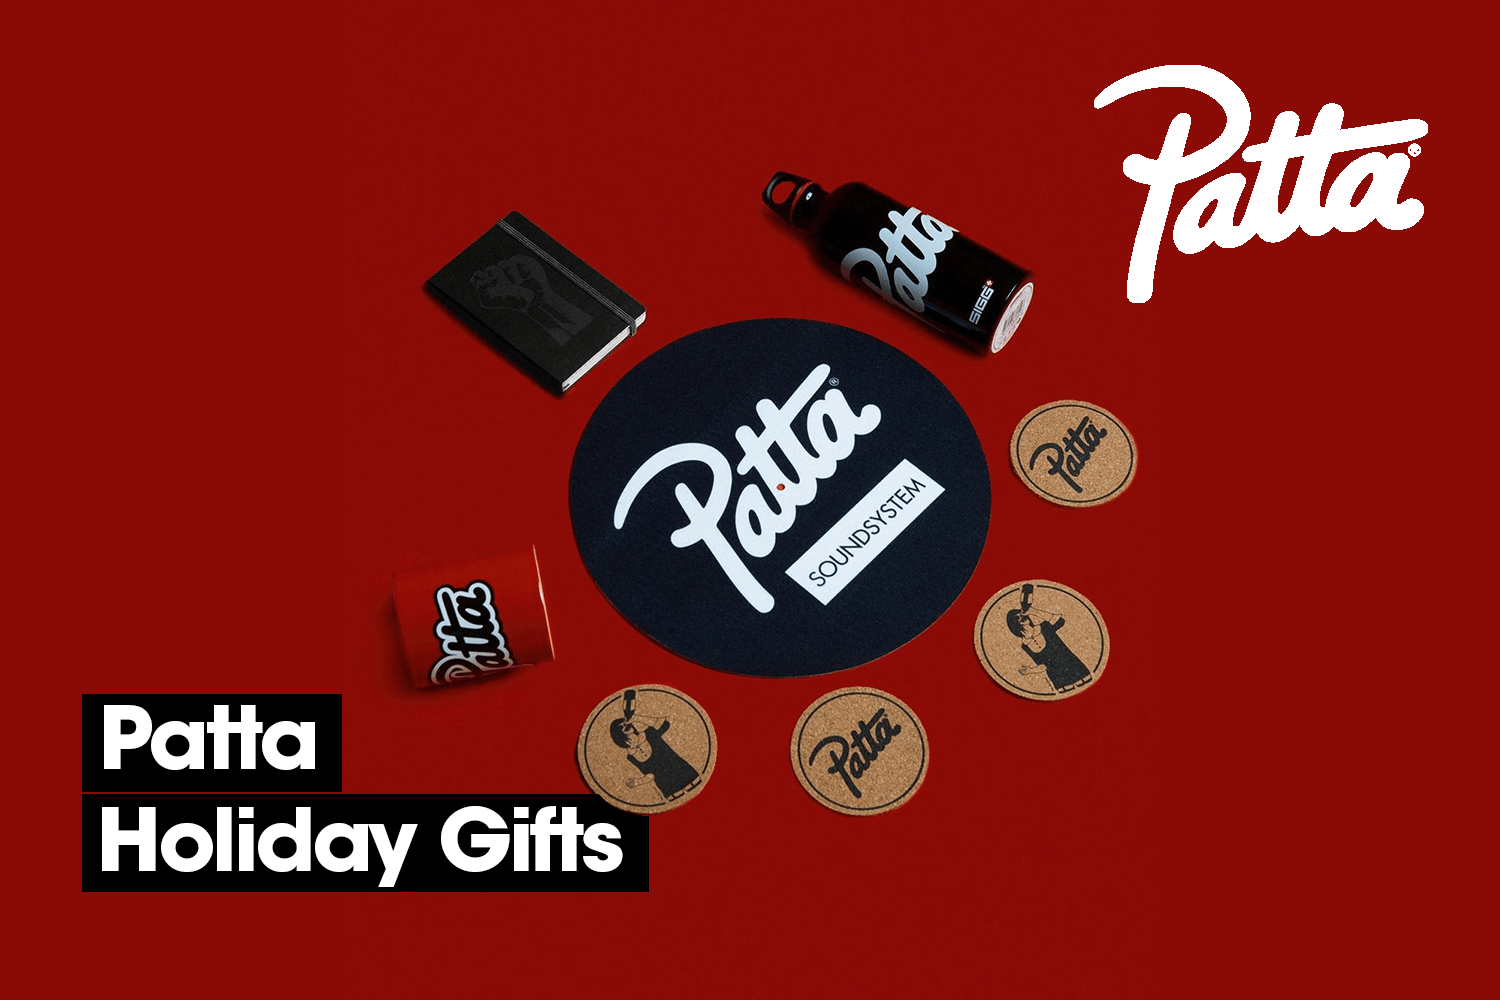 Our favourite Christmas gifts at Patta